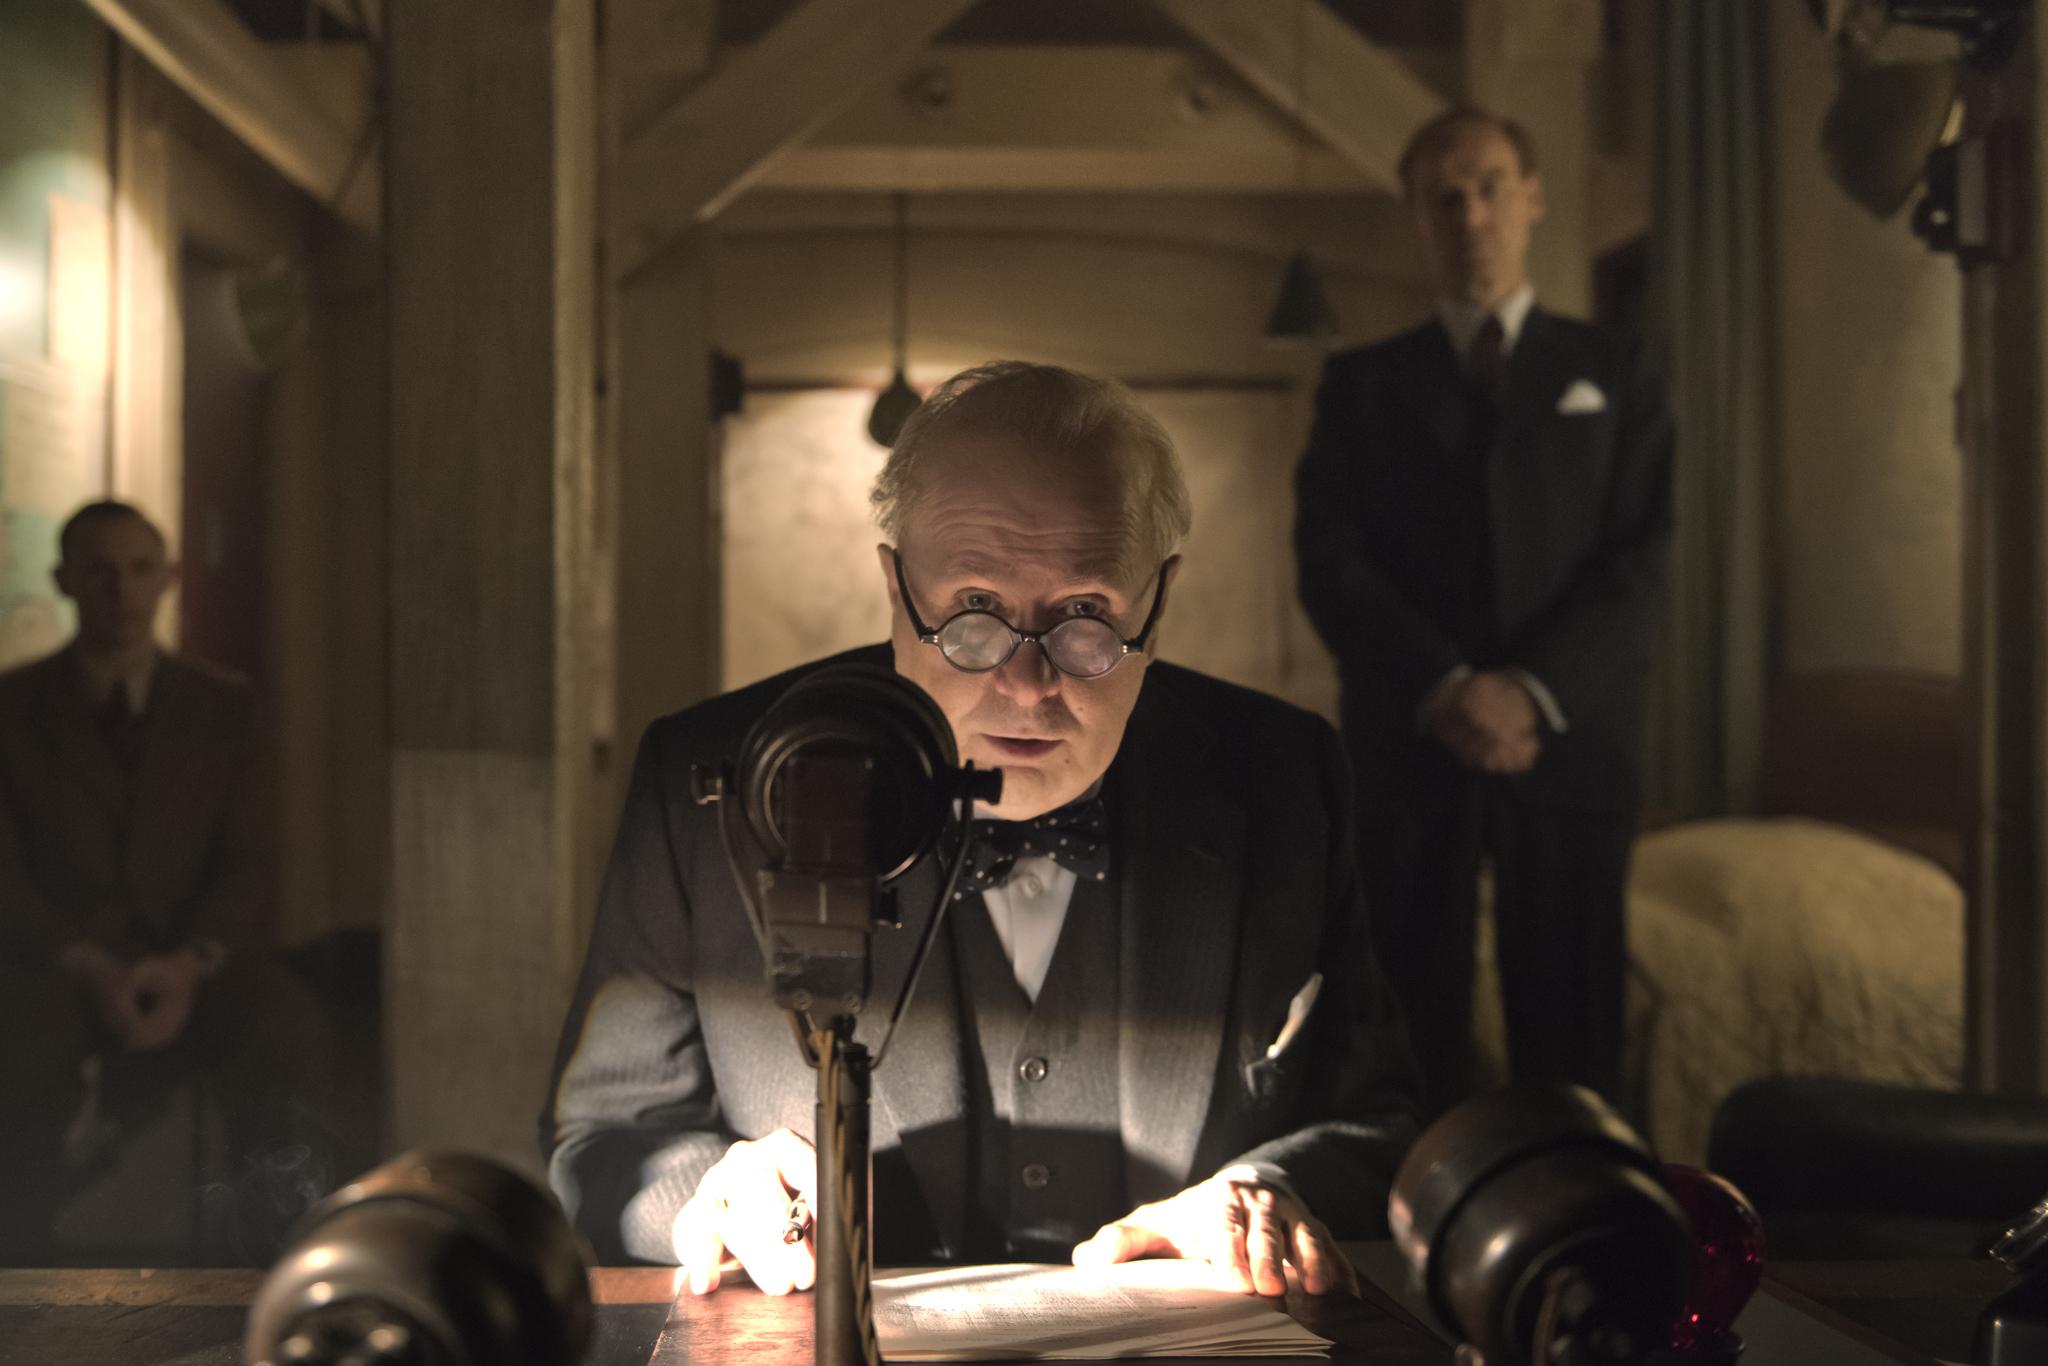 Gary Oldman inspires a nation in The Darkest Hour. | Photo: Focus Features